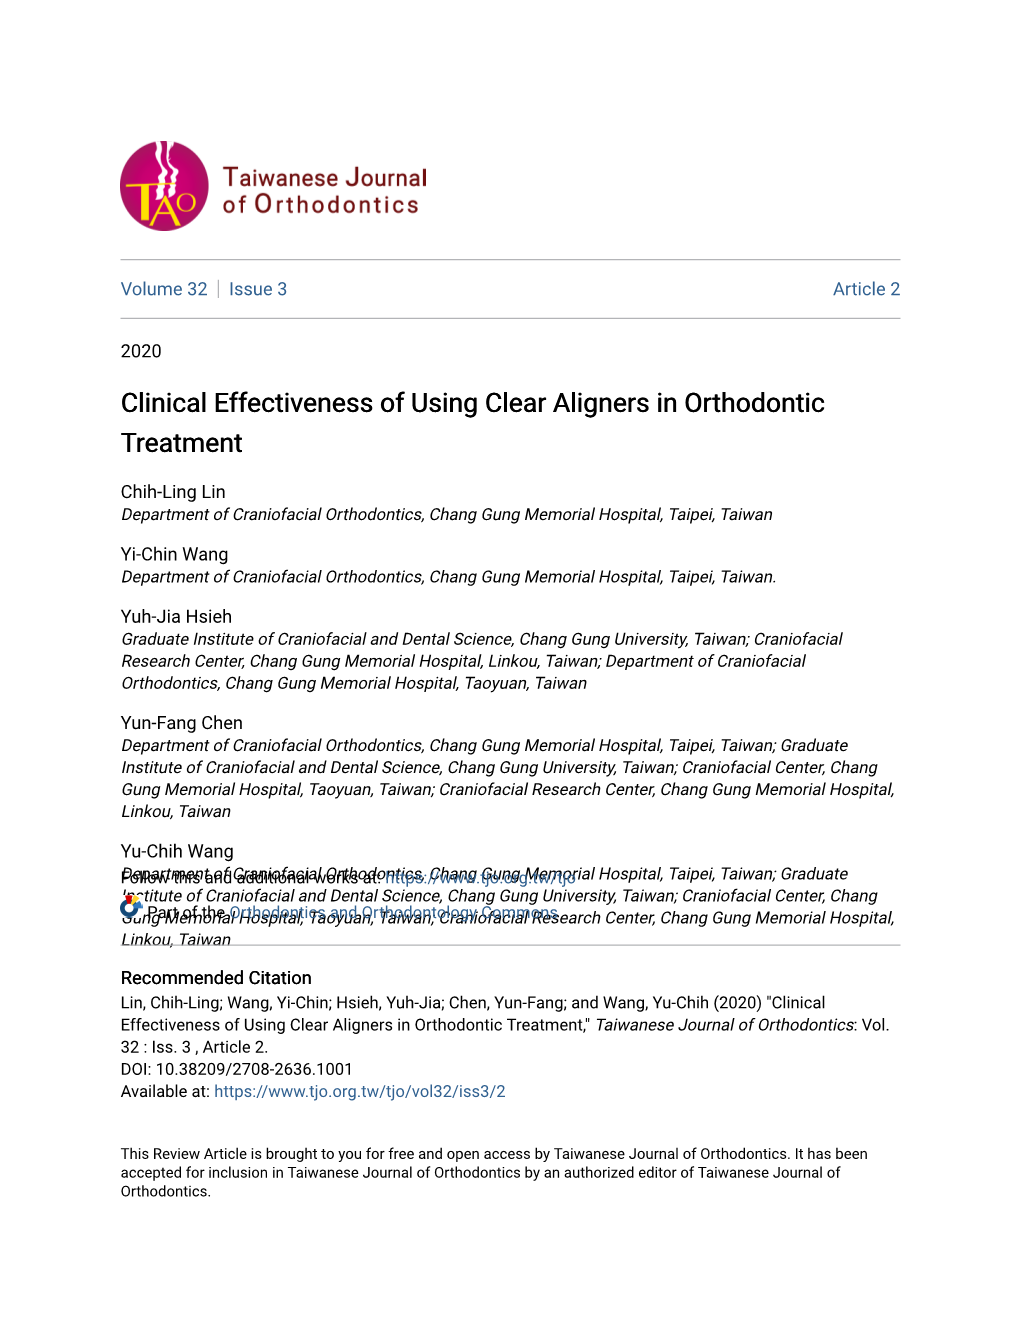 Clinical Effectiveness of Using Clear Aligners in Orthodontic Treatment